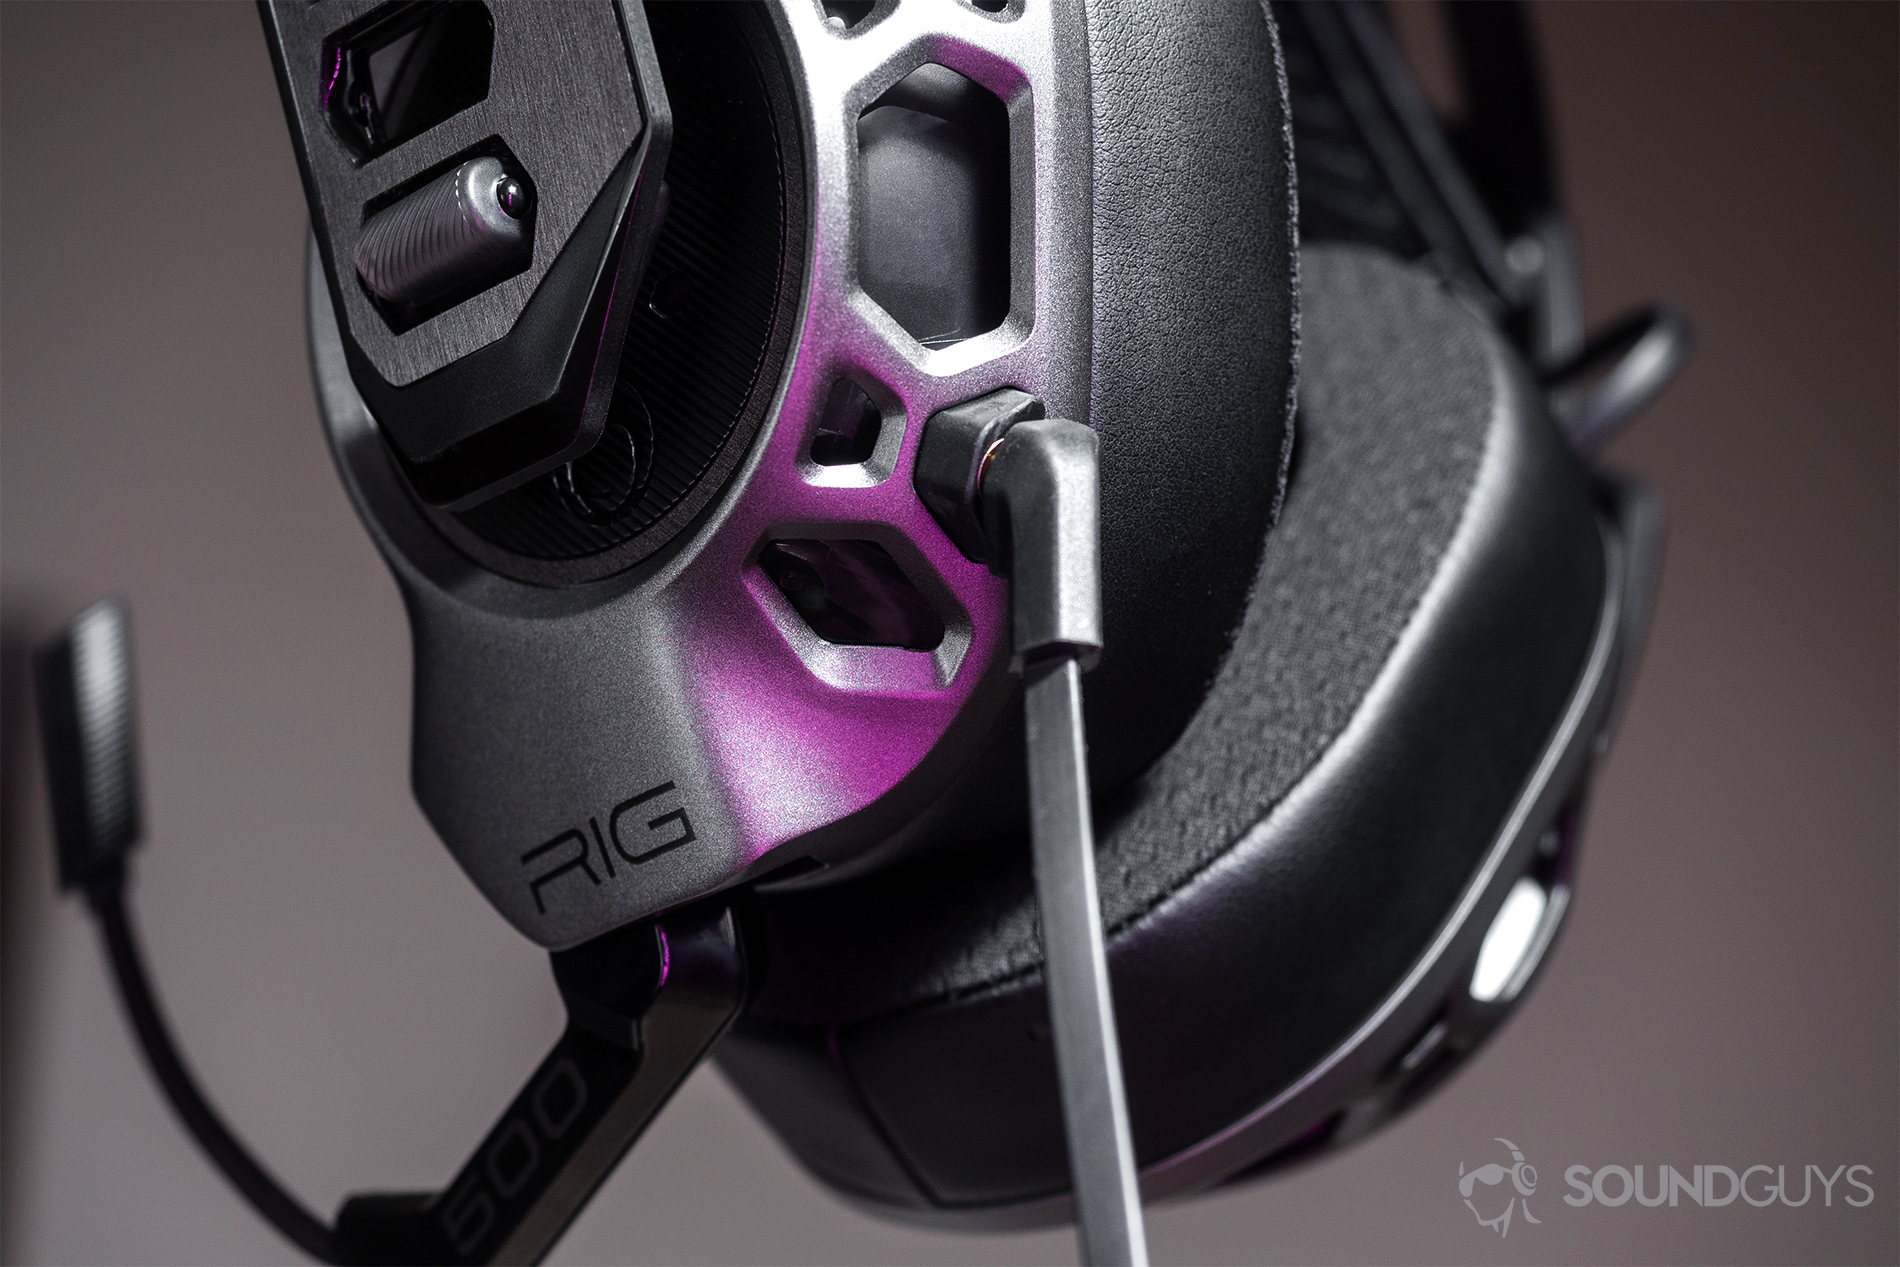 An upward image of the 3.5mm input and the angled jack plugged in. It also depicts the geometric design of the ear cups.